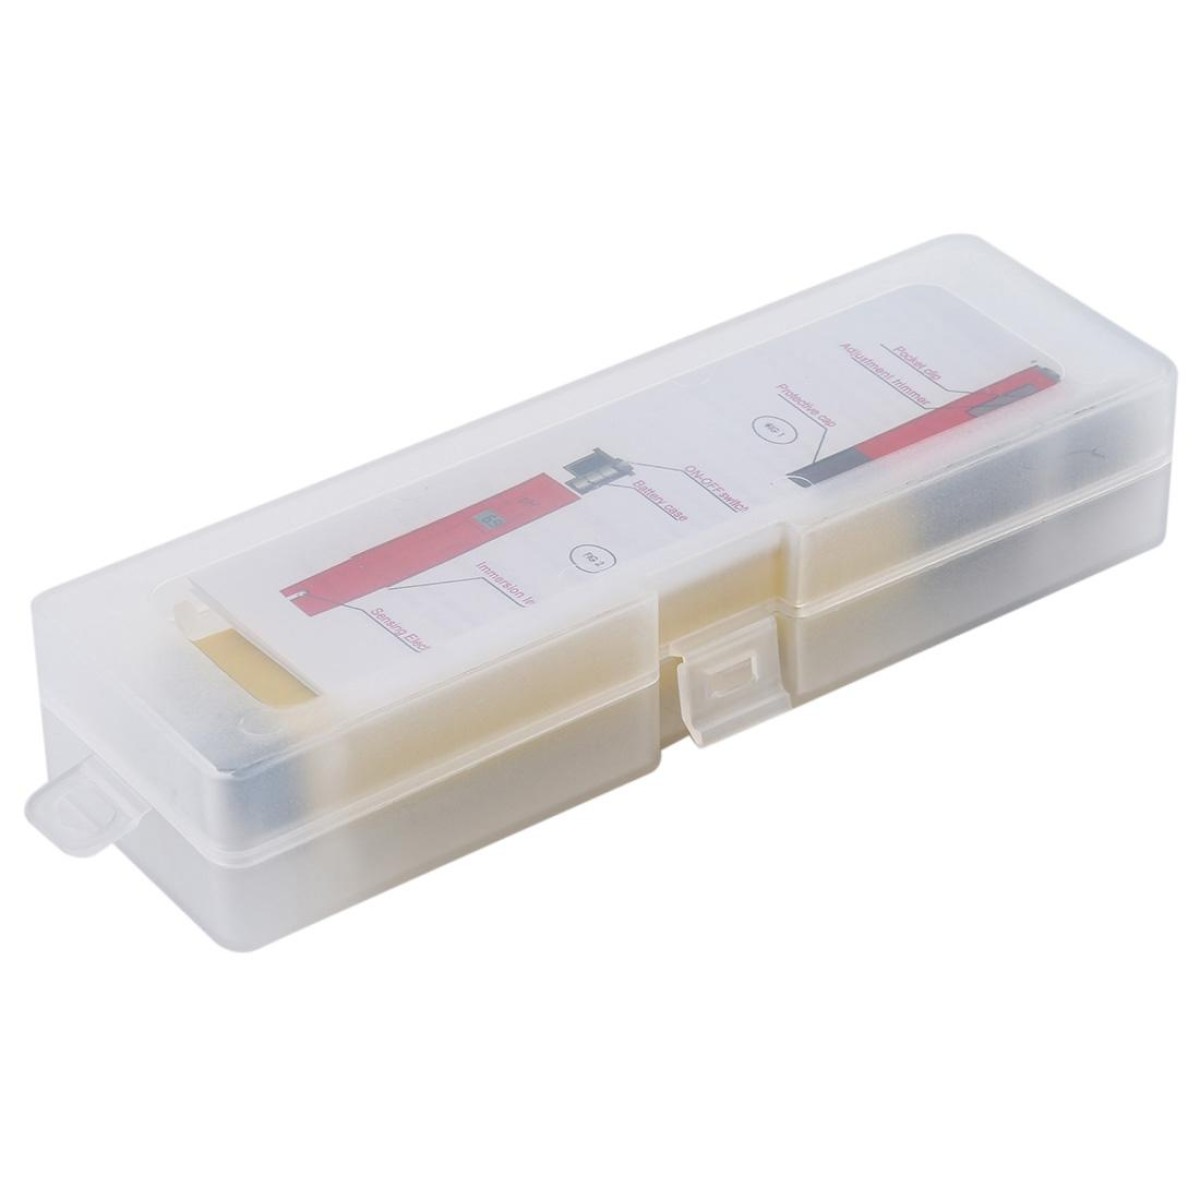 Pocket-sized PH Meter with ATC(Yellow)